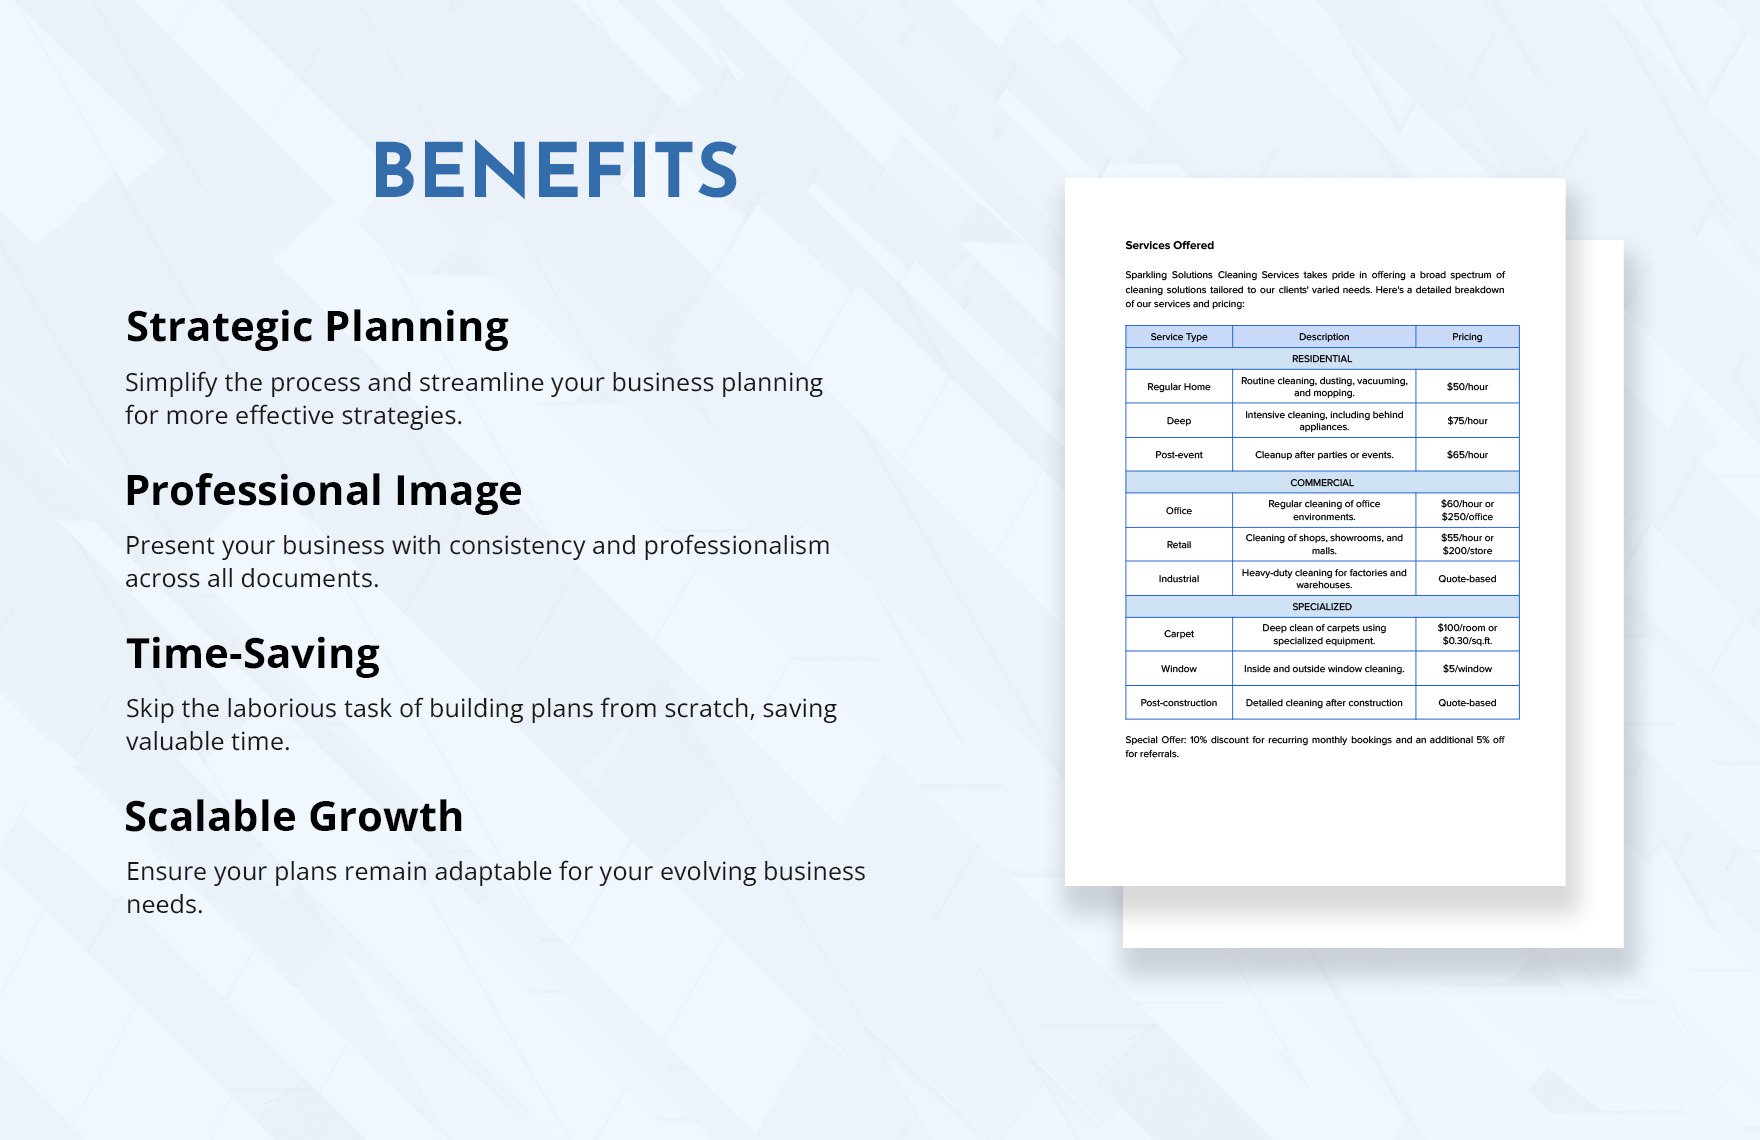 Cleaning Business Plan Template